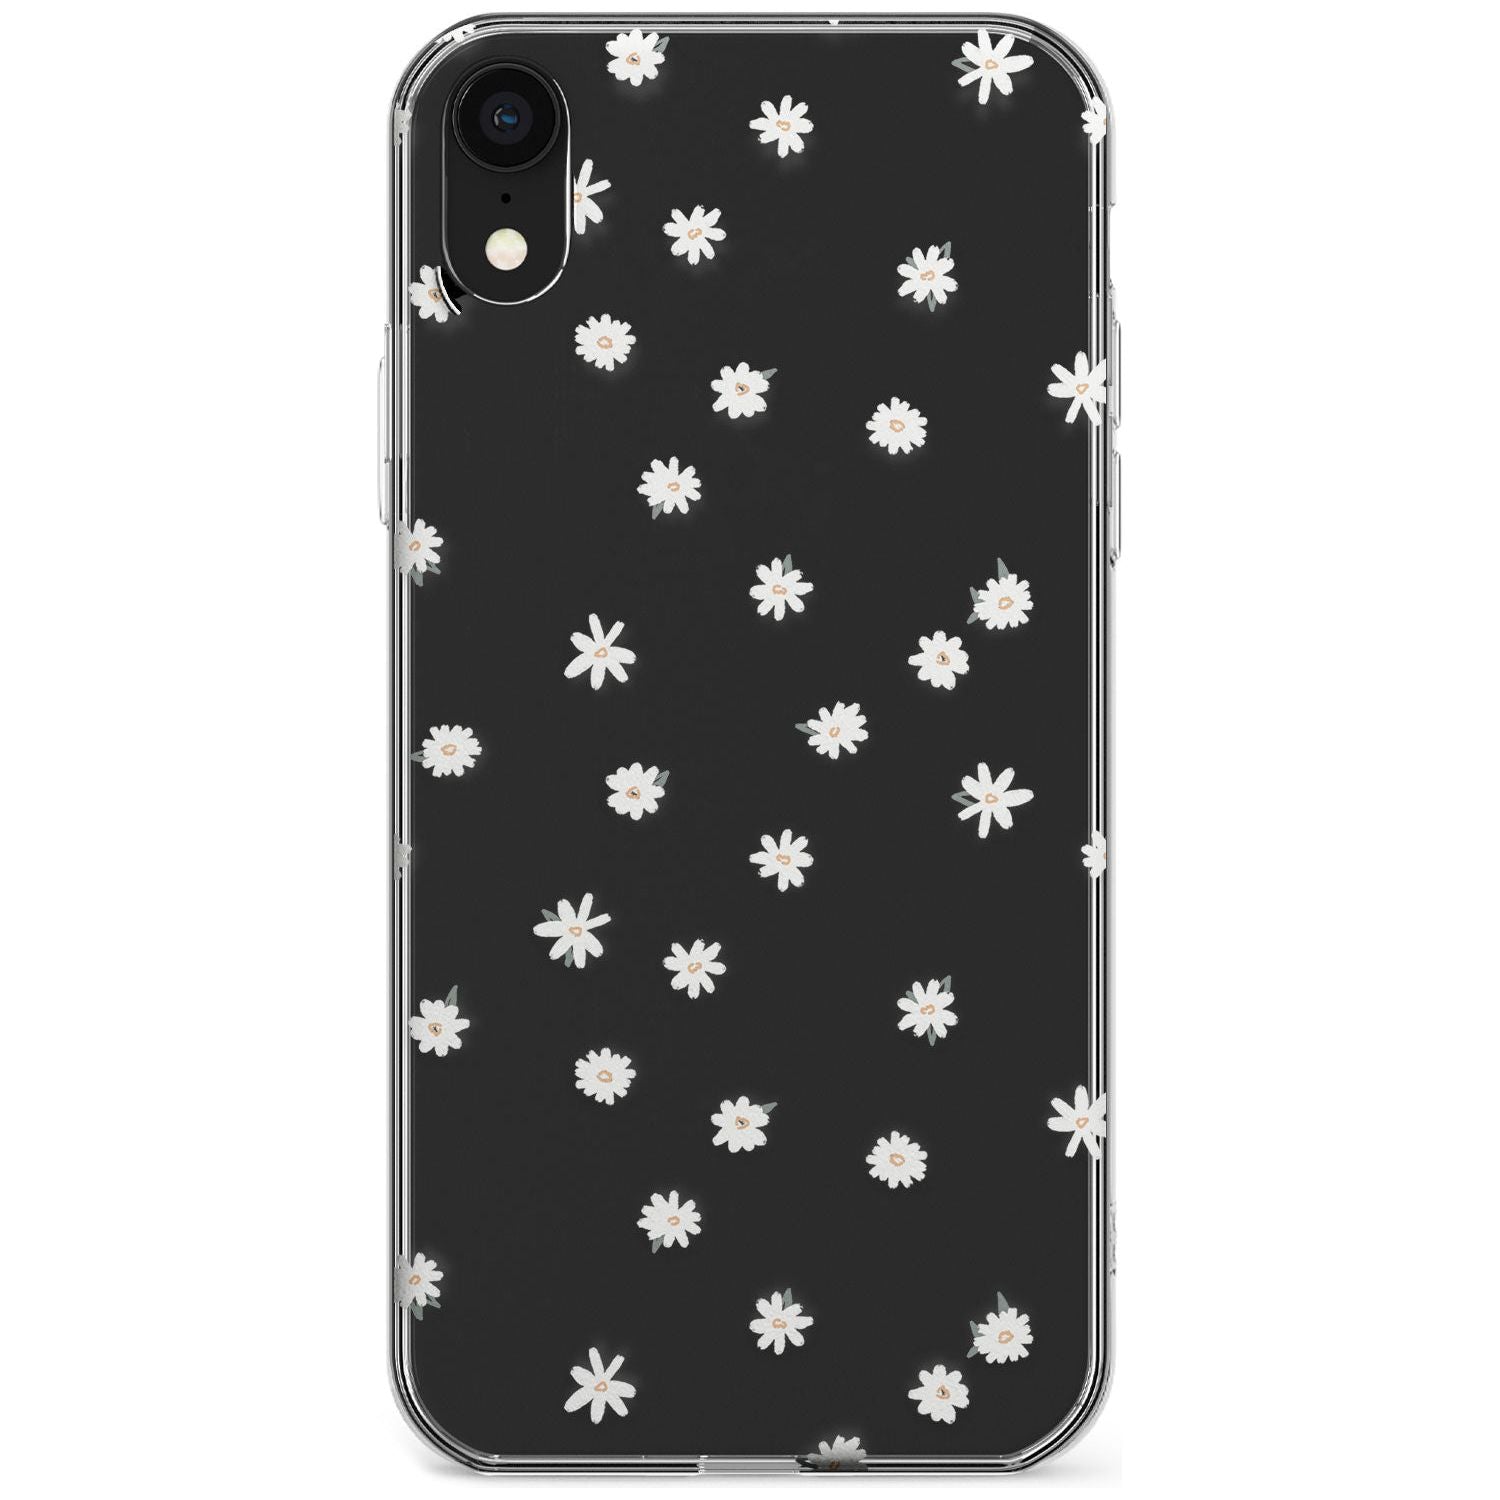 White Stars on Clear Phone Case for iPhone X XS Max XR